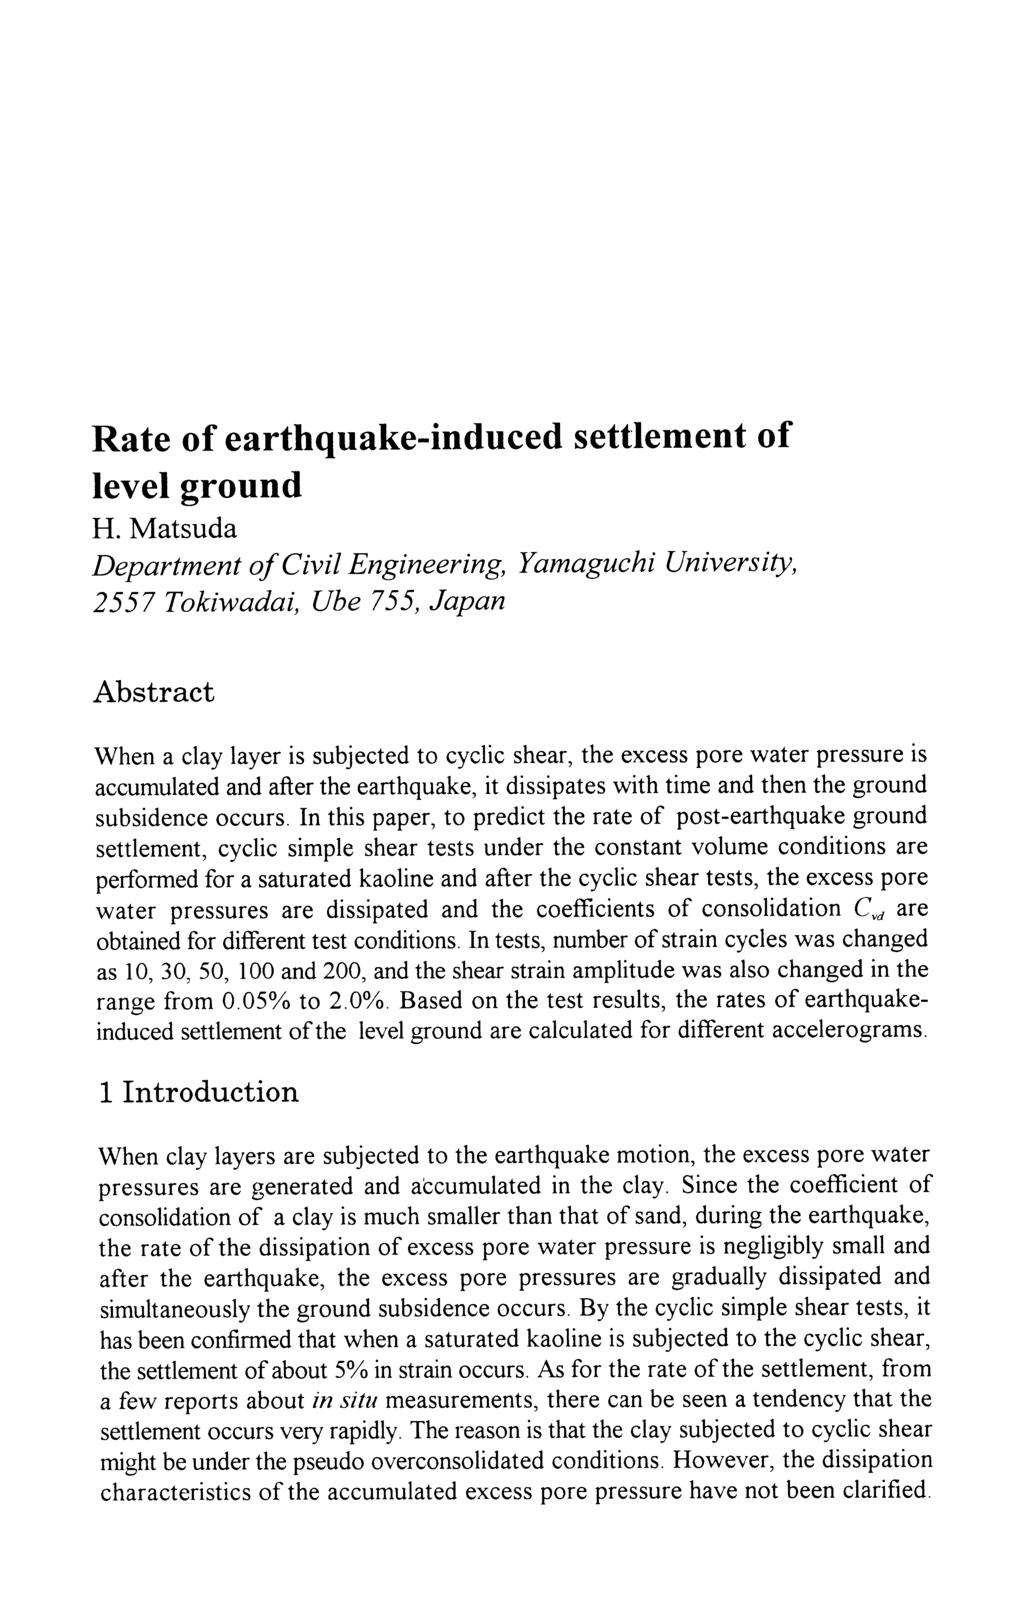 Rate of earthquake-induced settlement of level ground H.